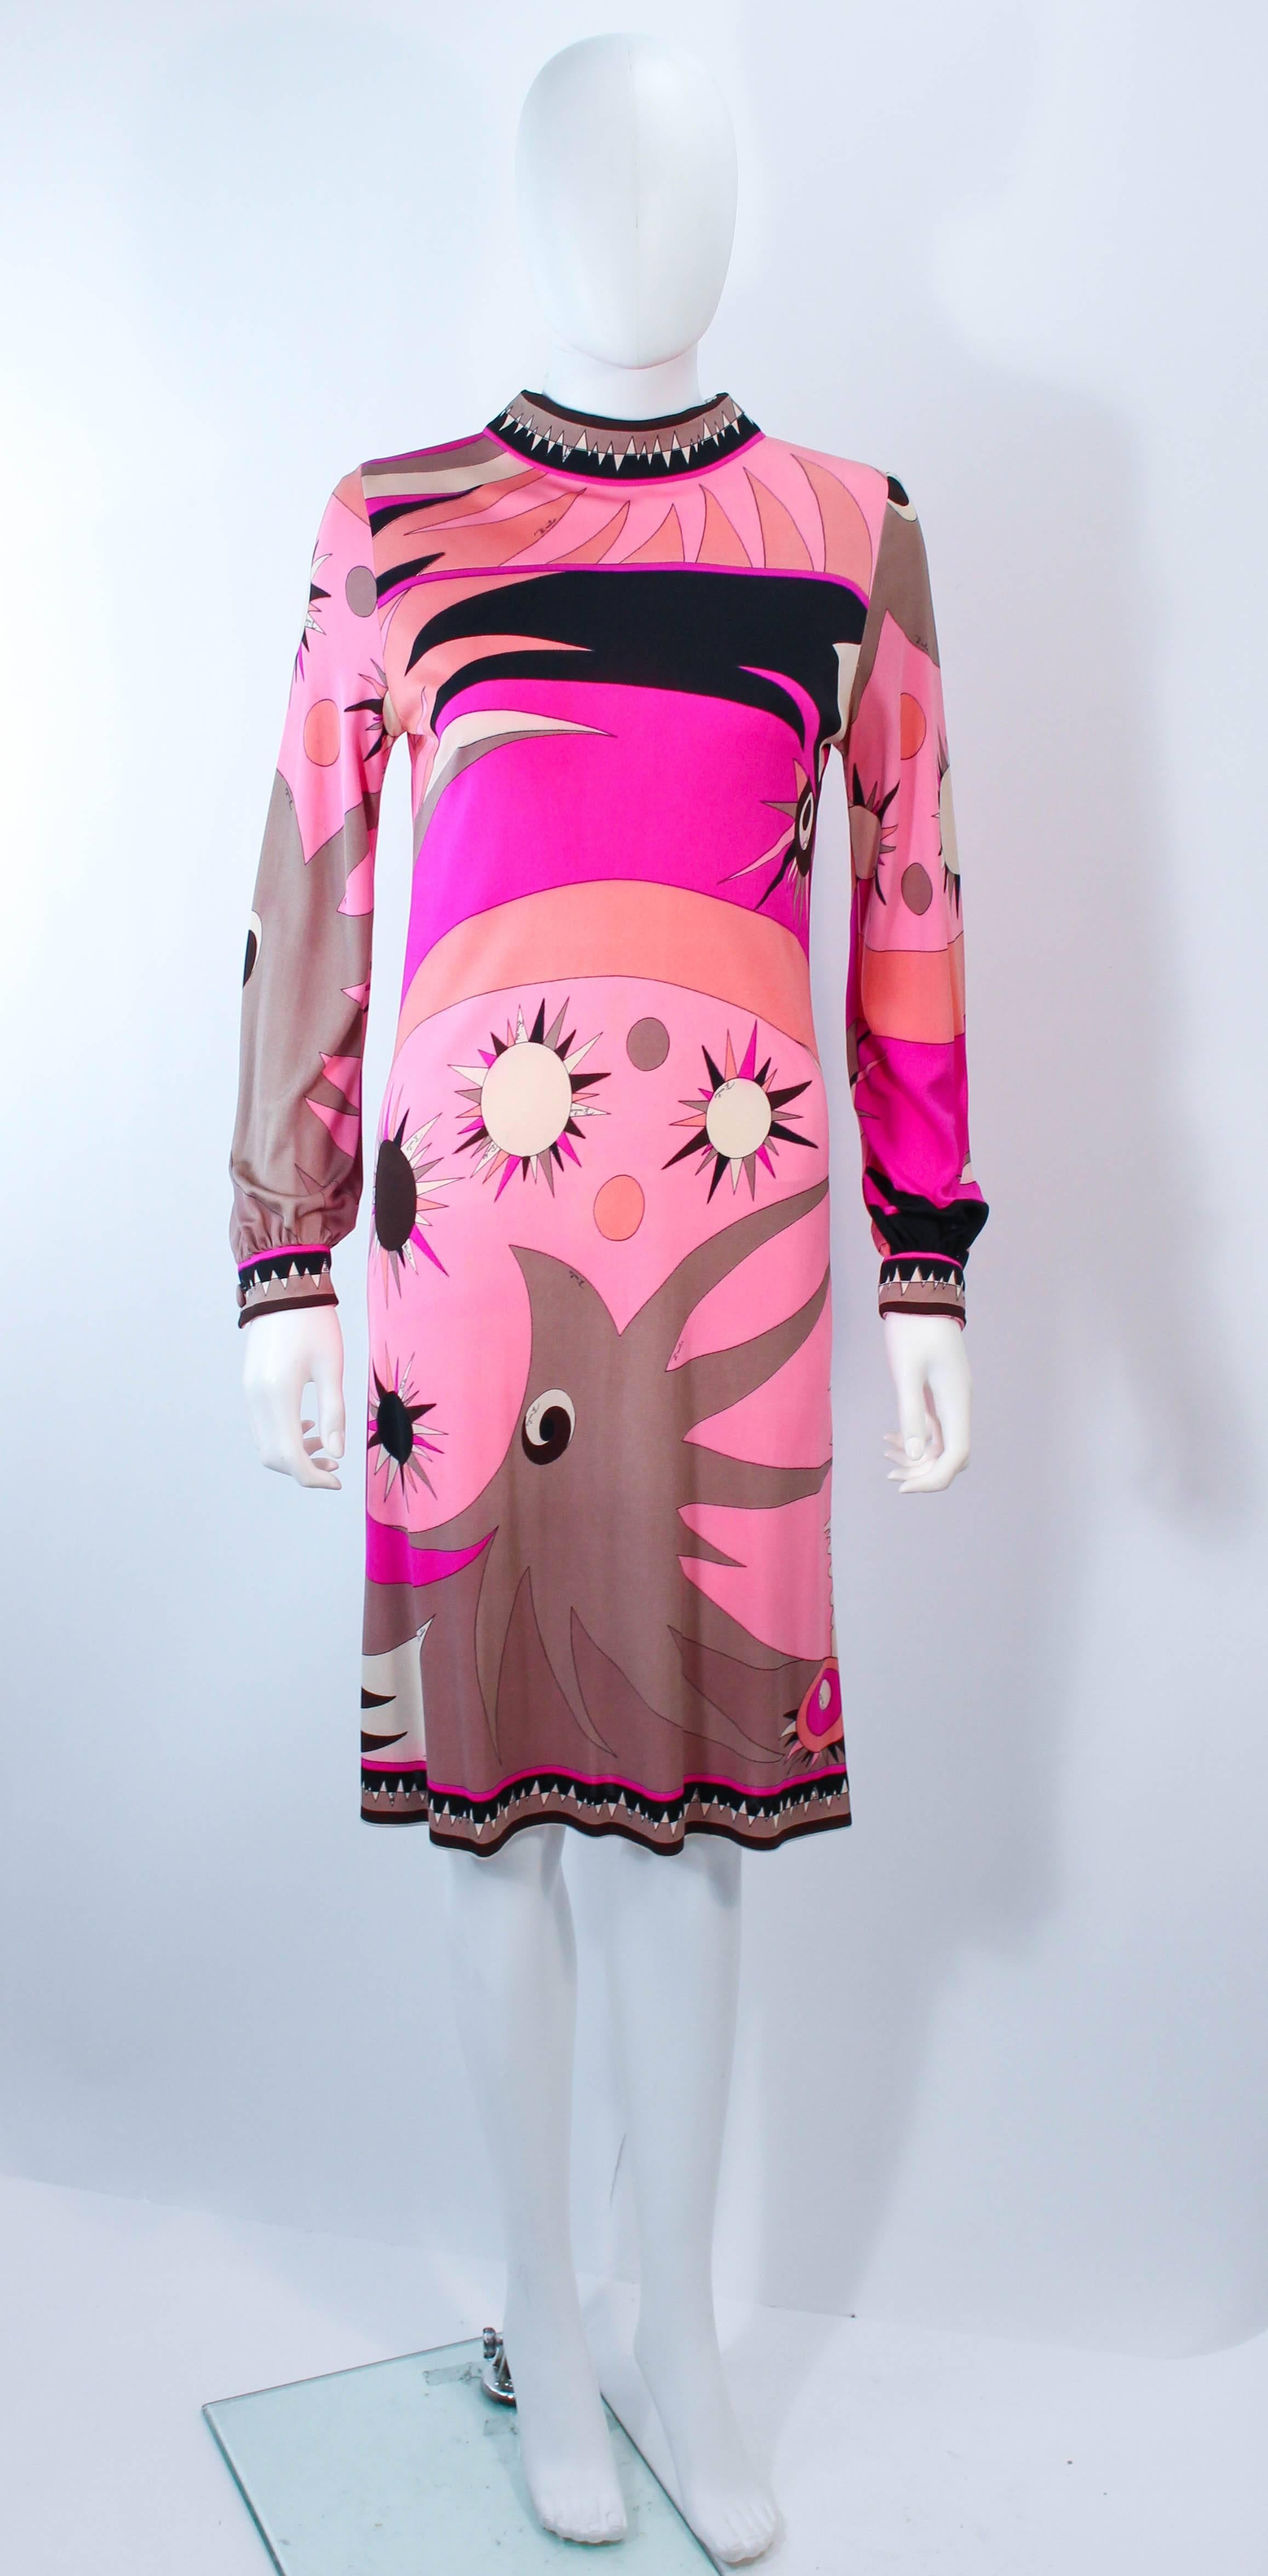 This Emilio Pucci dress is composed of a pick and black combination stretch silk with a classic abstract Pucci print. There is a side zipper closure. In great vintage condition, excellent for a collector or design research. Sold 'AS IS' there is